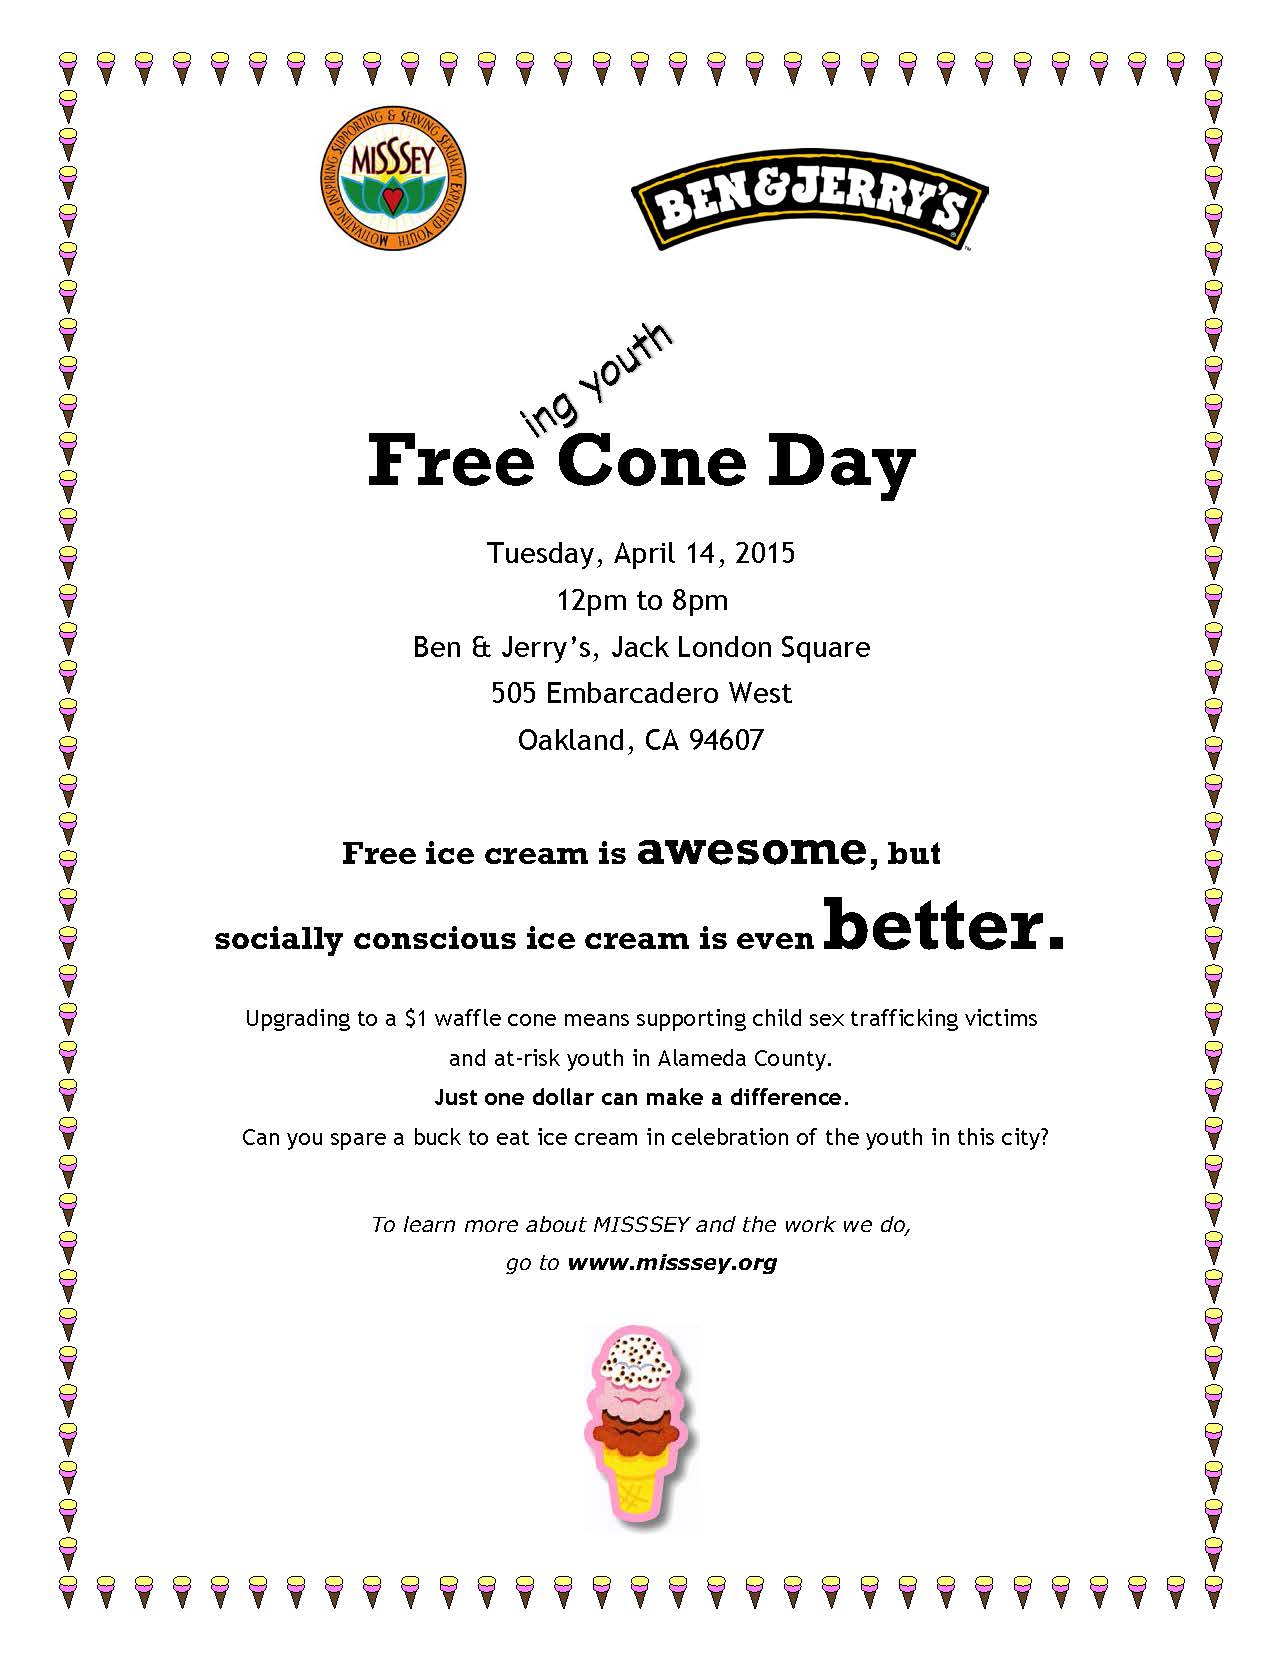 Free Cone Day Flyer 2